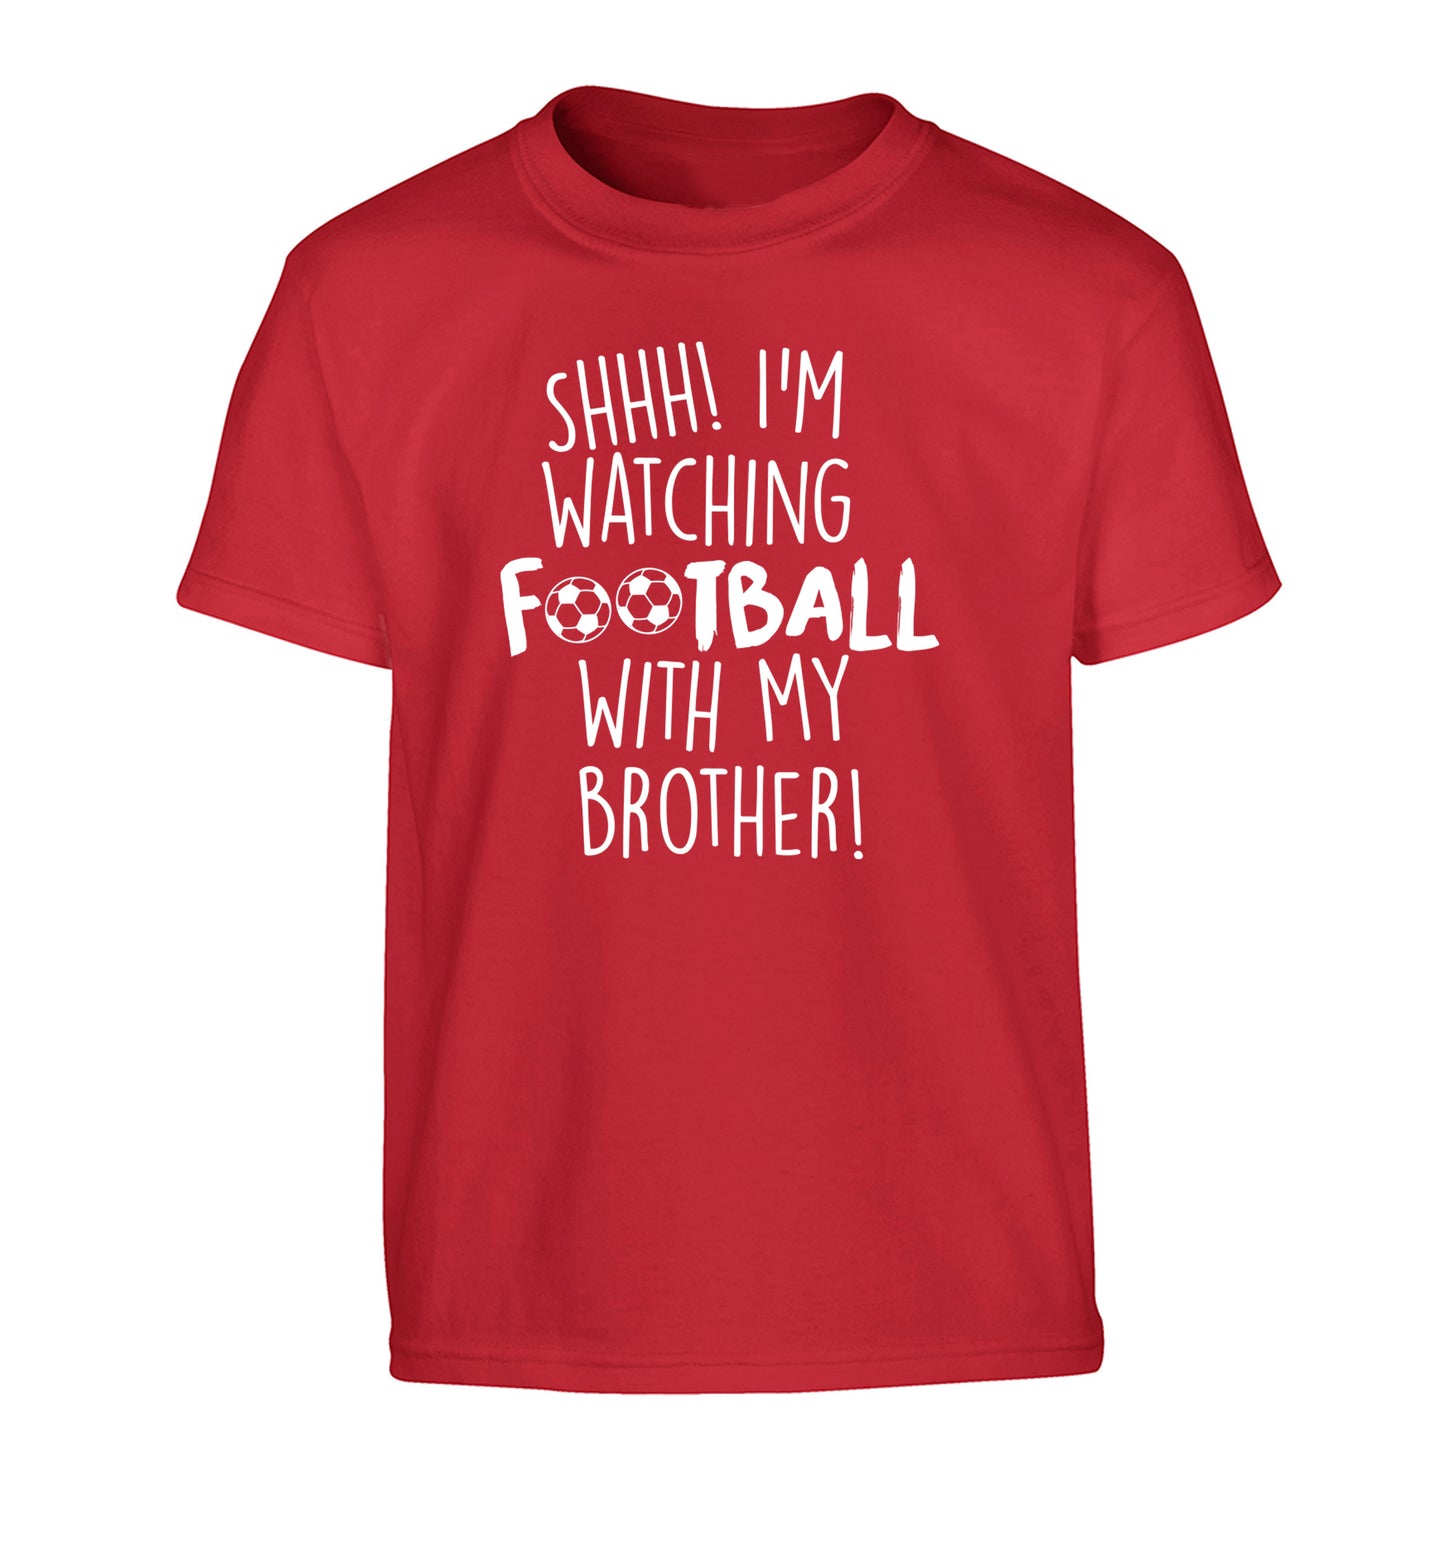 Shhh I'm watching football with my brother Children's red Tshirt 12-14 Years